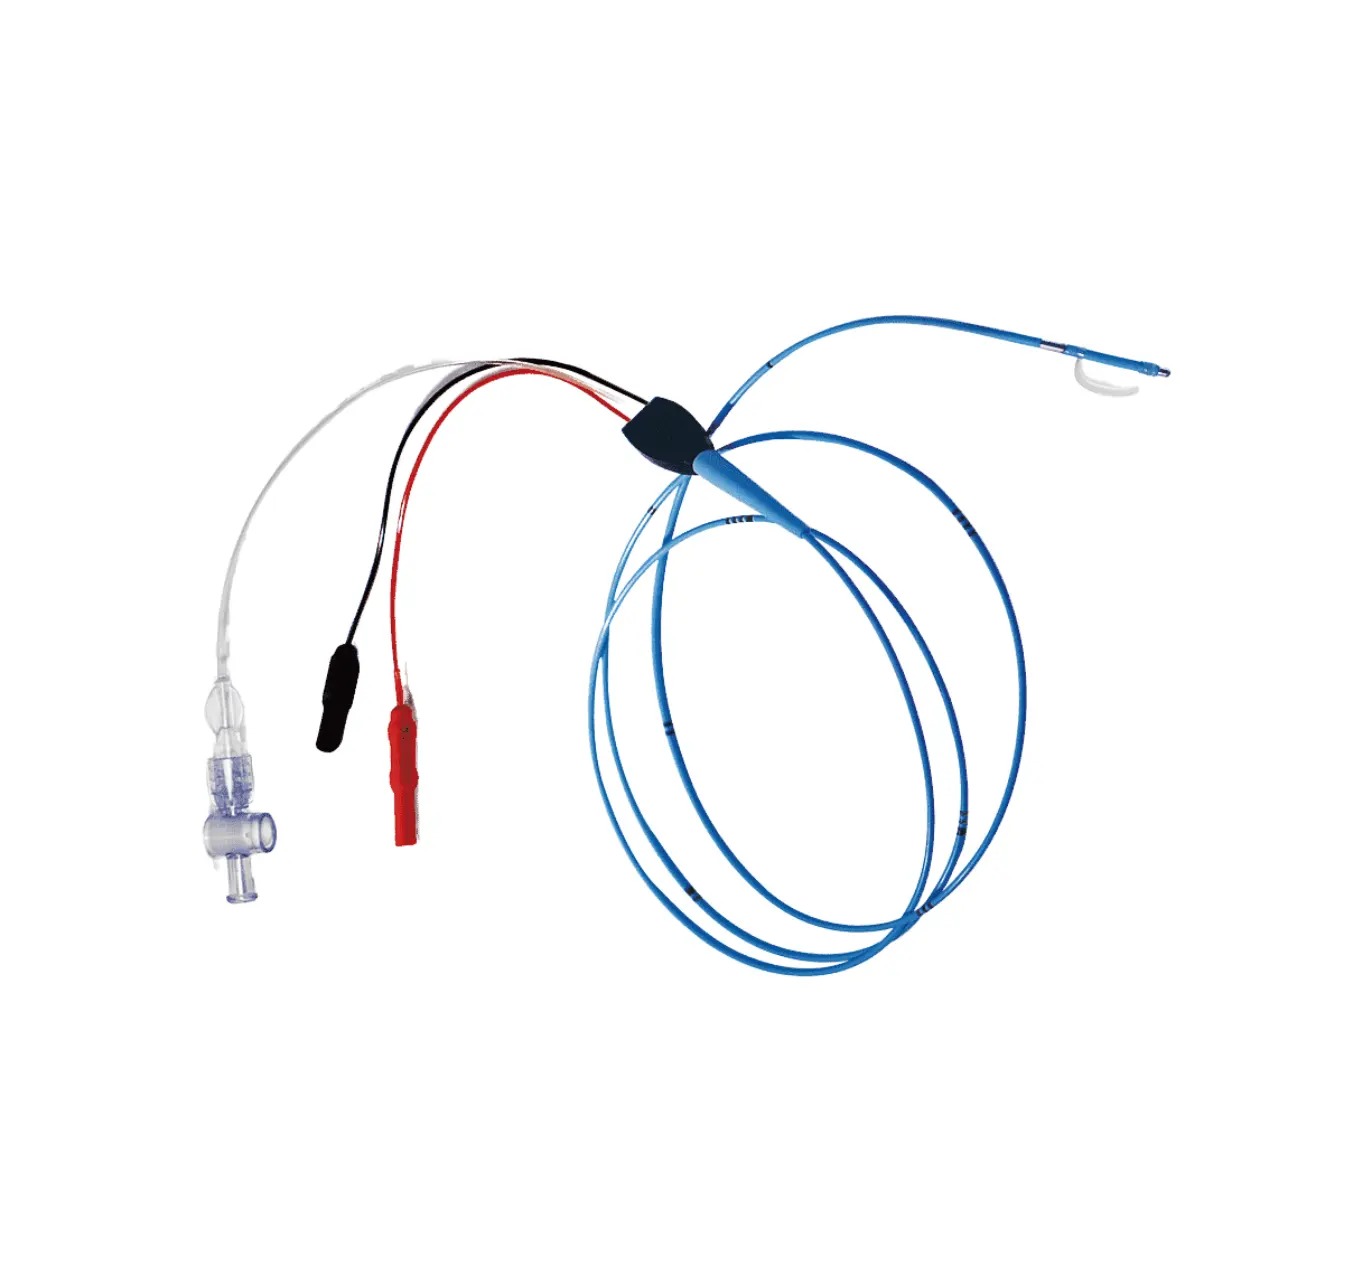 temporary pacing lead for cardiology clearlead Pacel Pvc Temporary Pacing Lead Latex Clearlead Temporary Pacing Lead